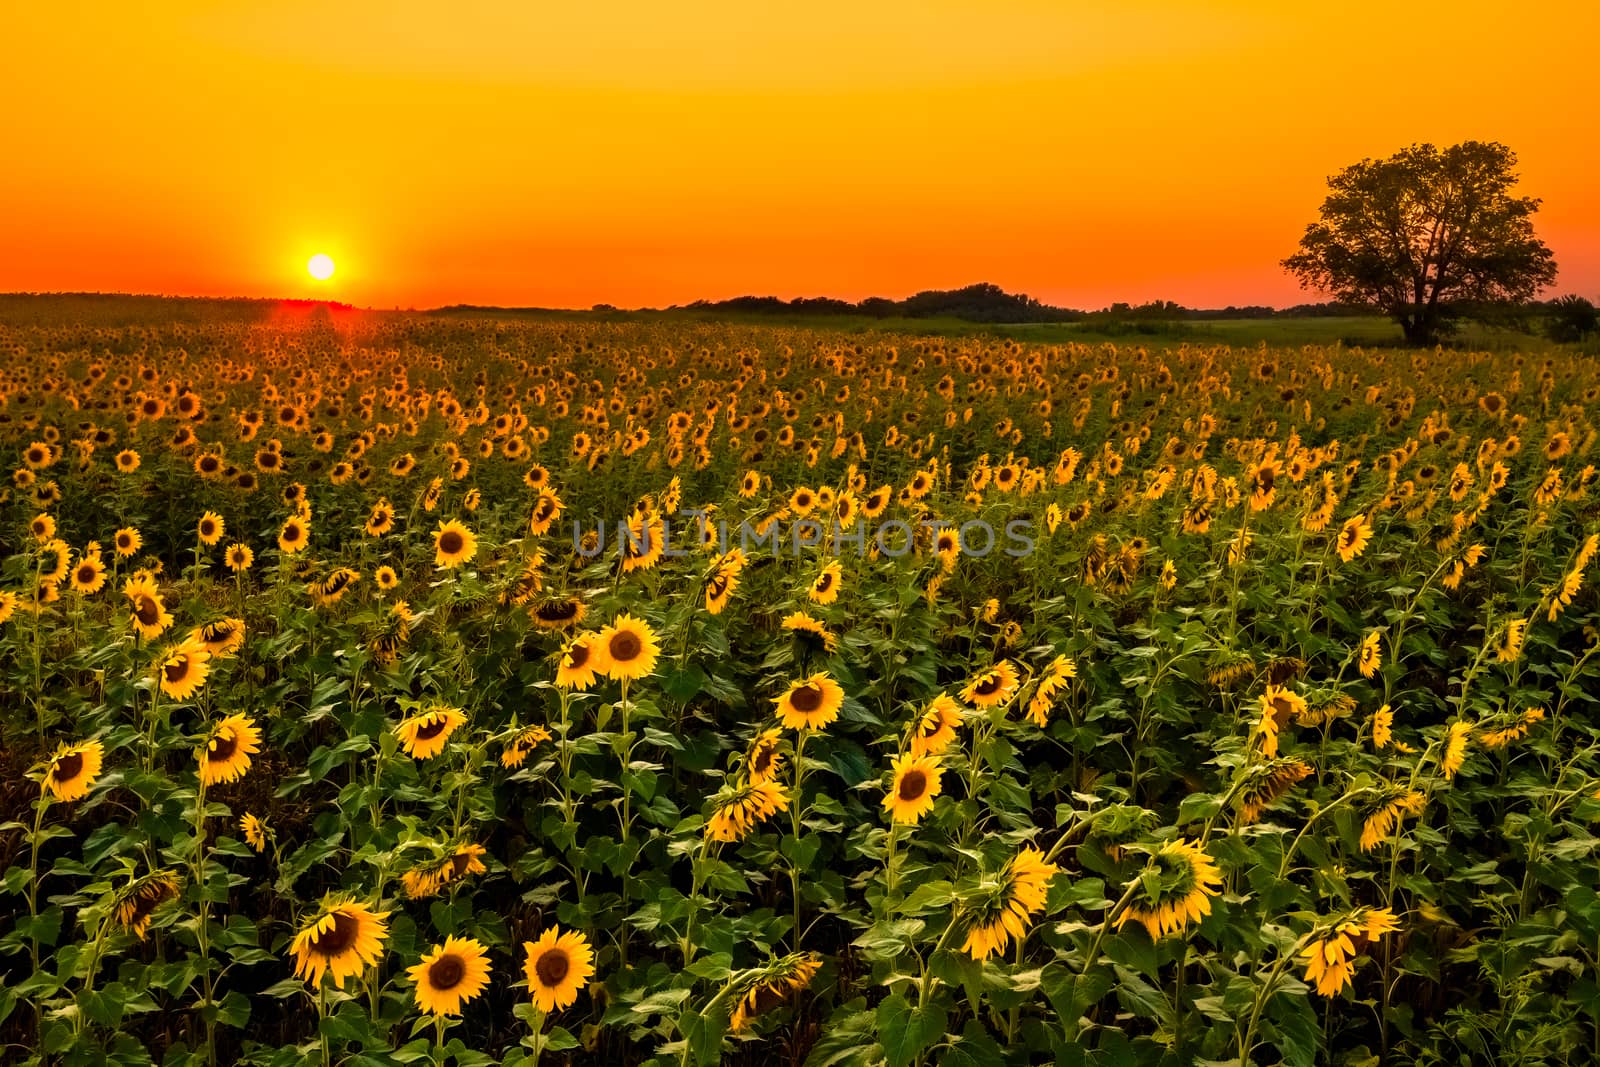 A field full of sunflowers as the sun starts going down.